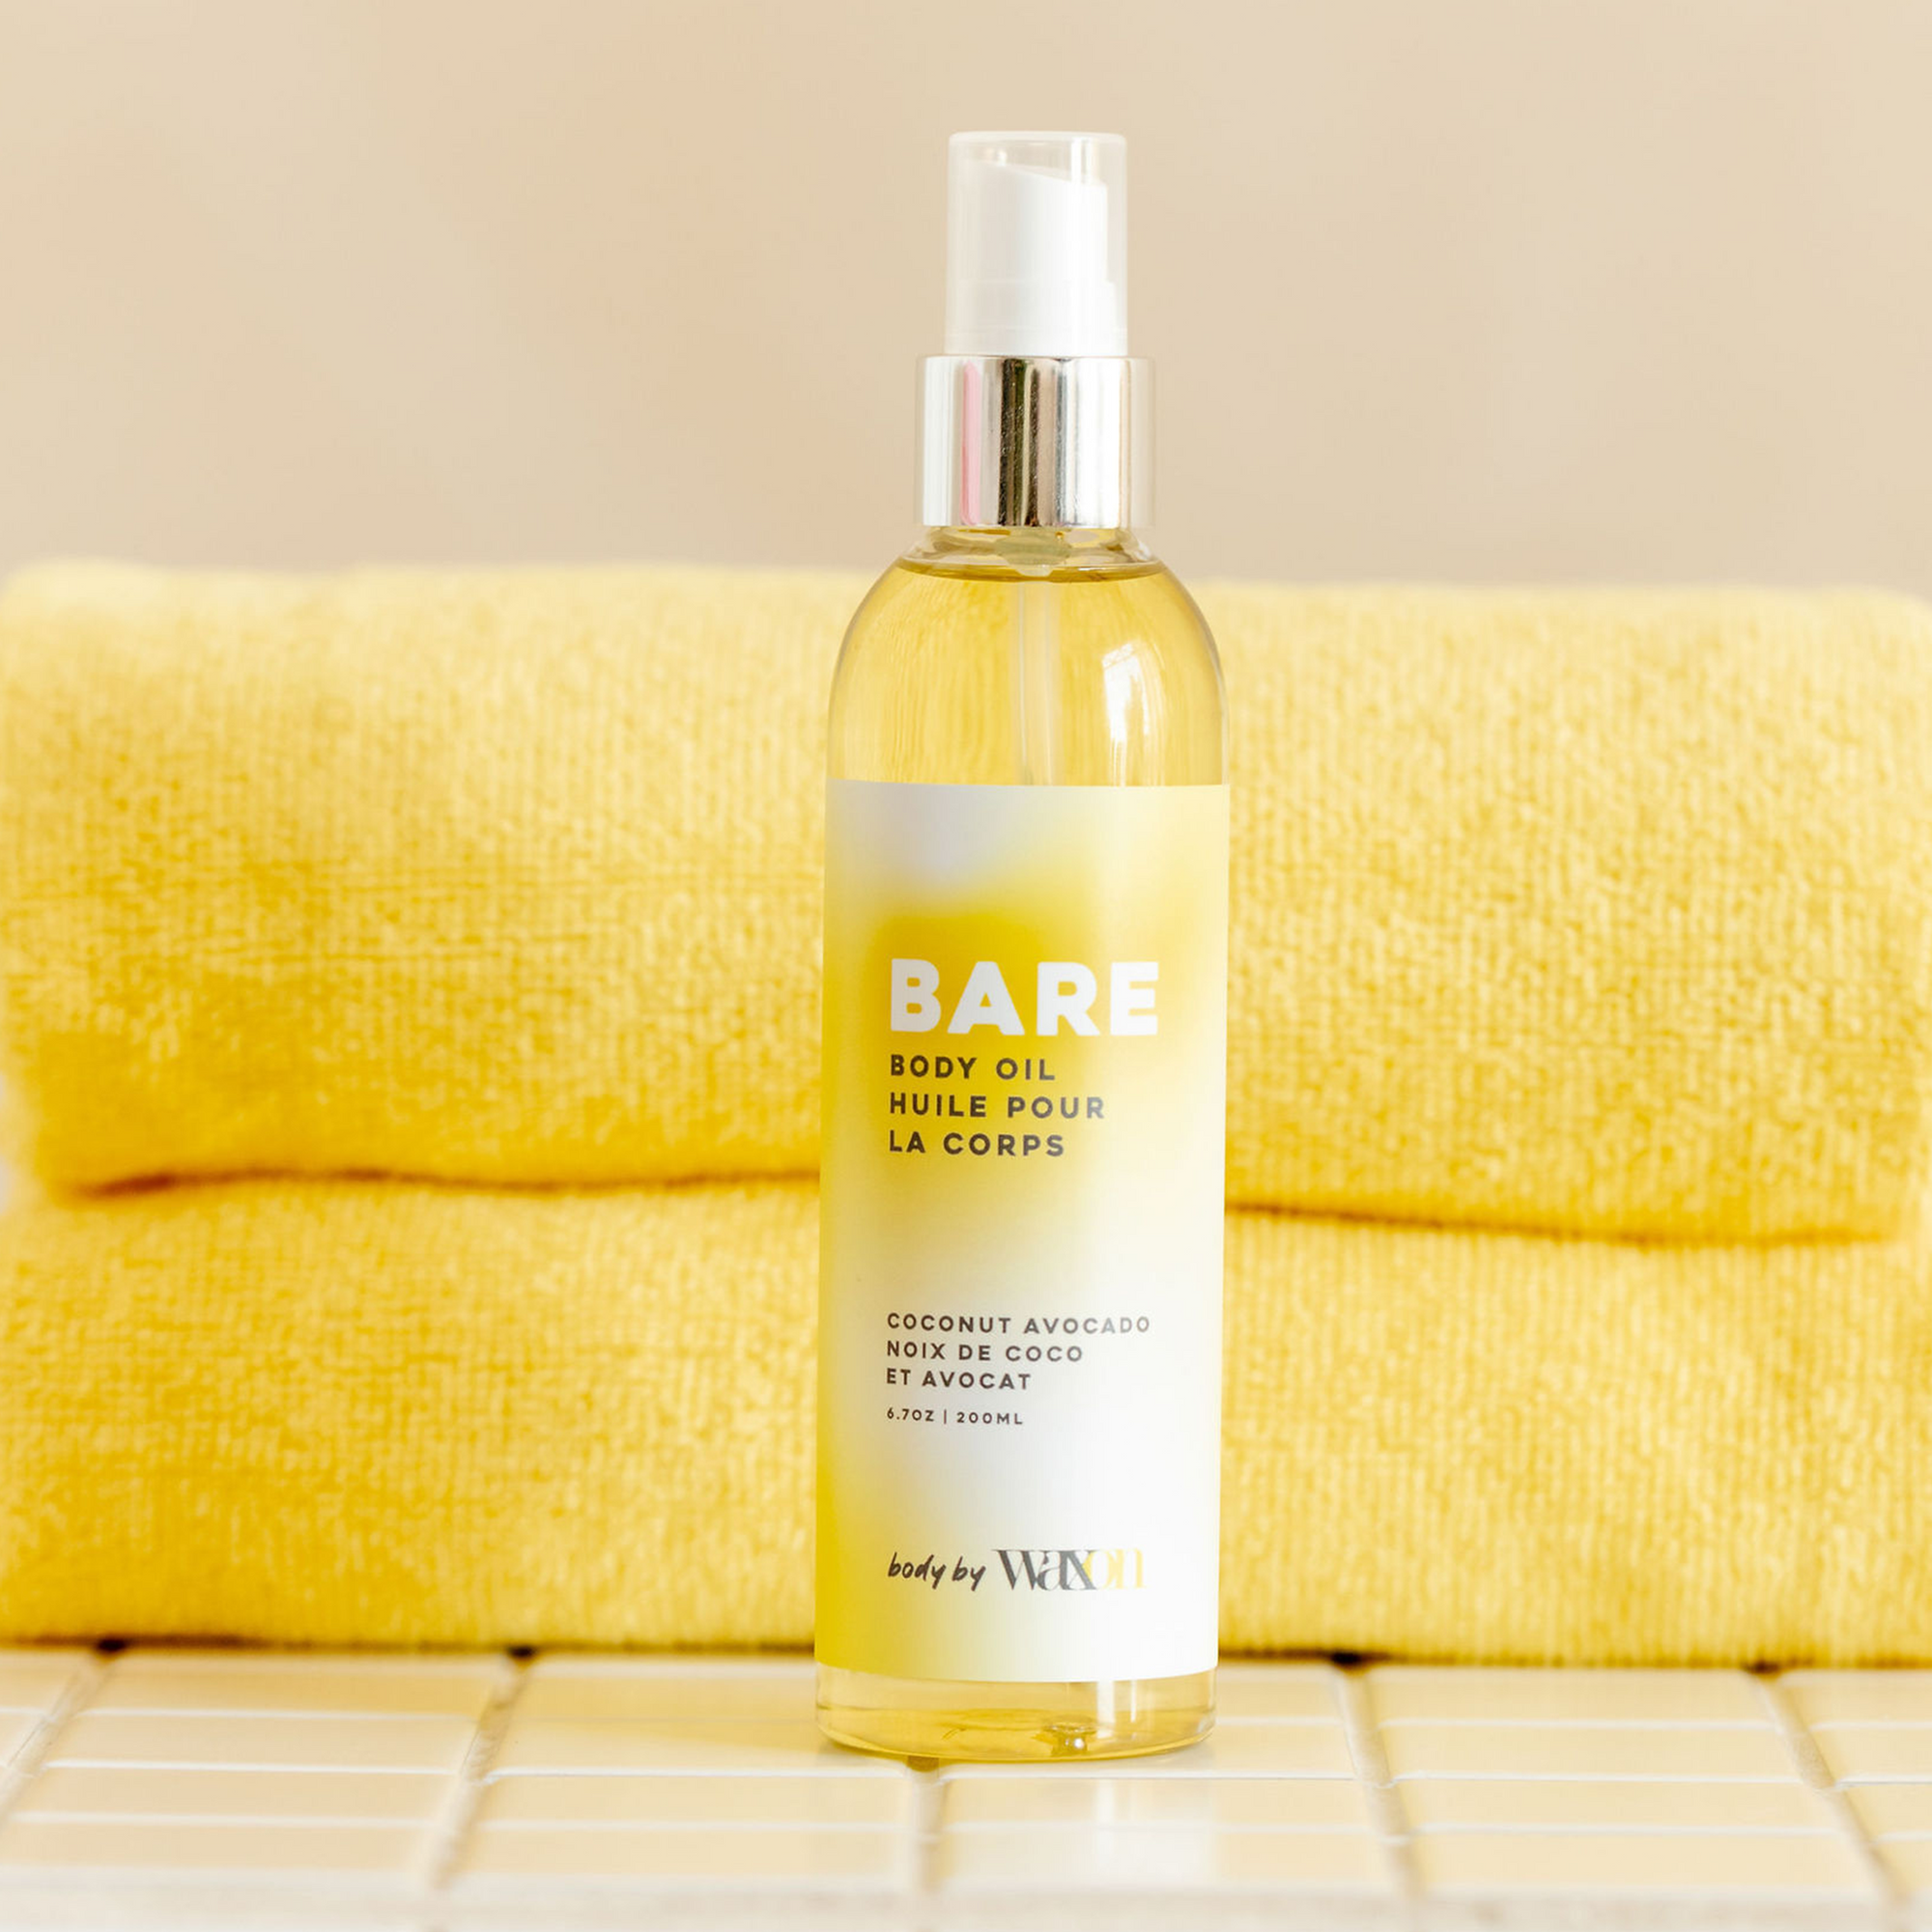 BARE body oil bottle, shot in front of a stack of yellow towels on a tiled surface.